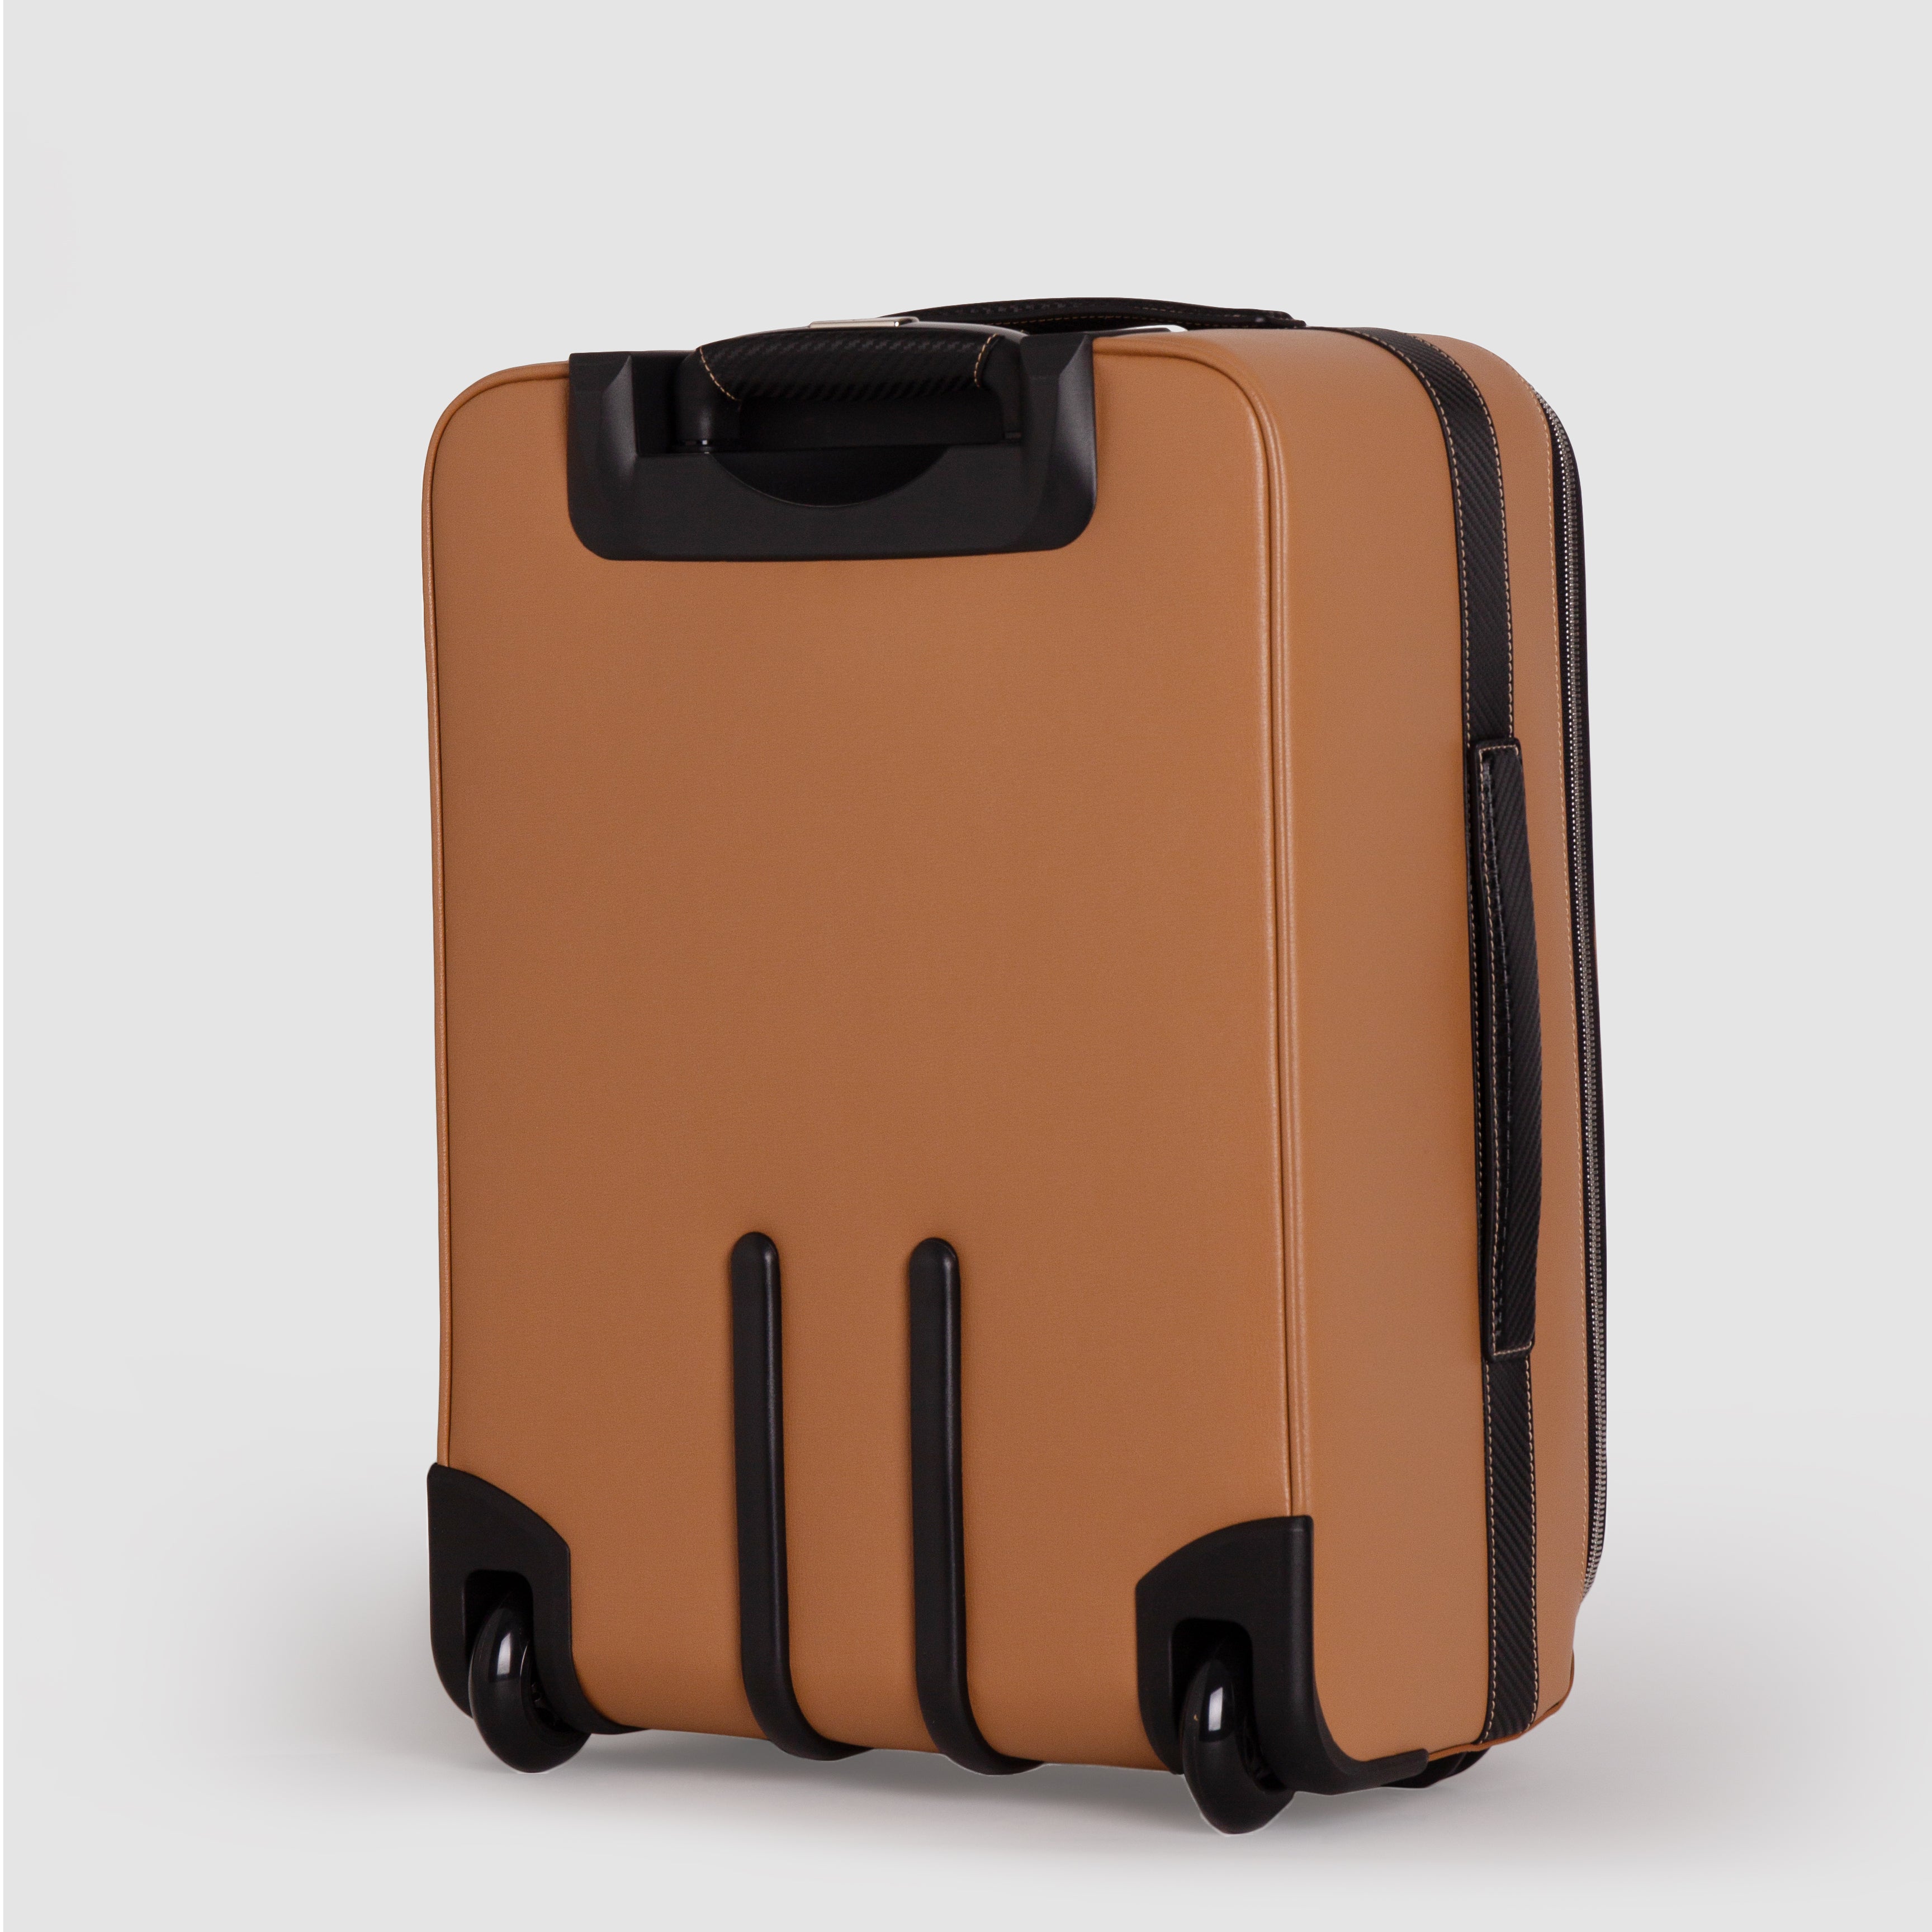 Soul of Nomad Brown Carry-On Luggage